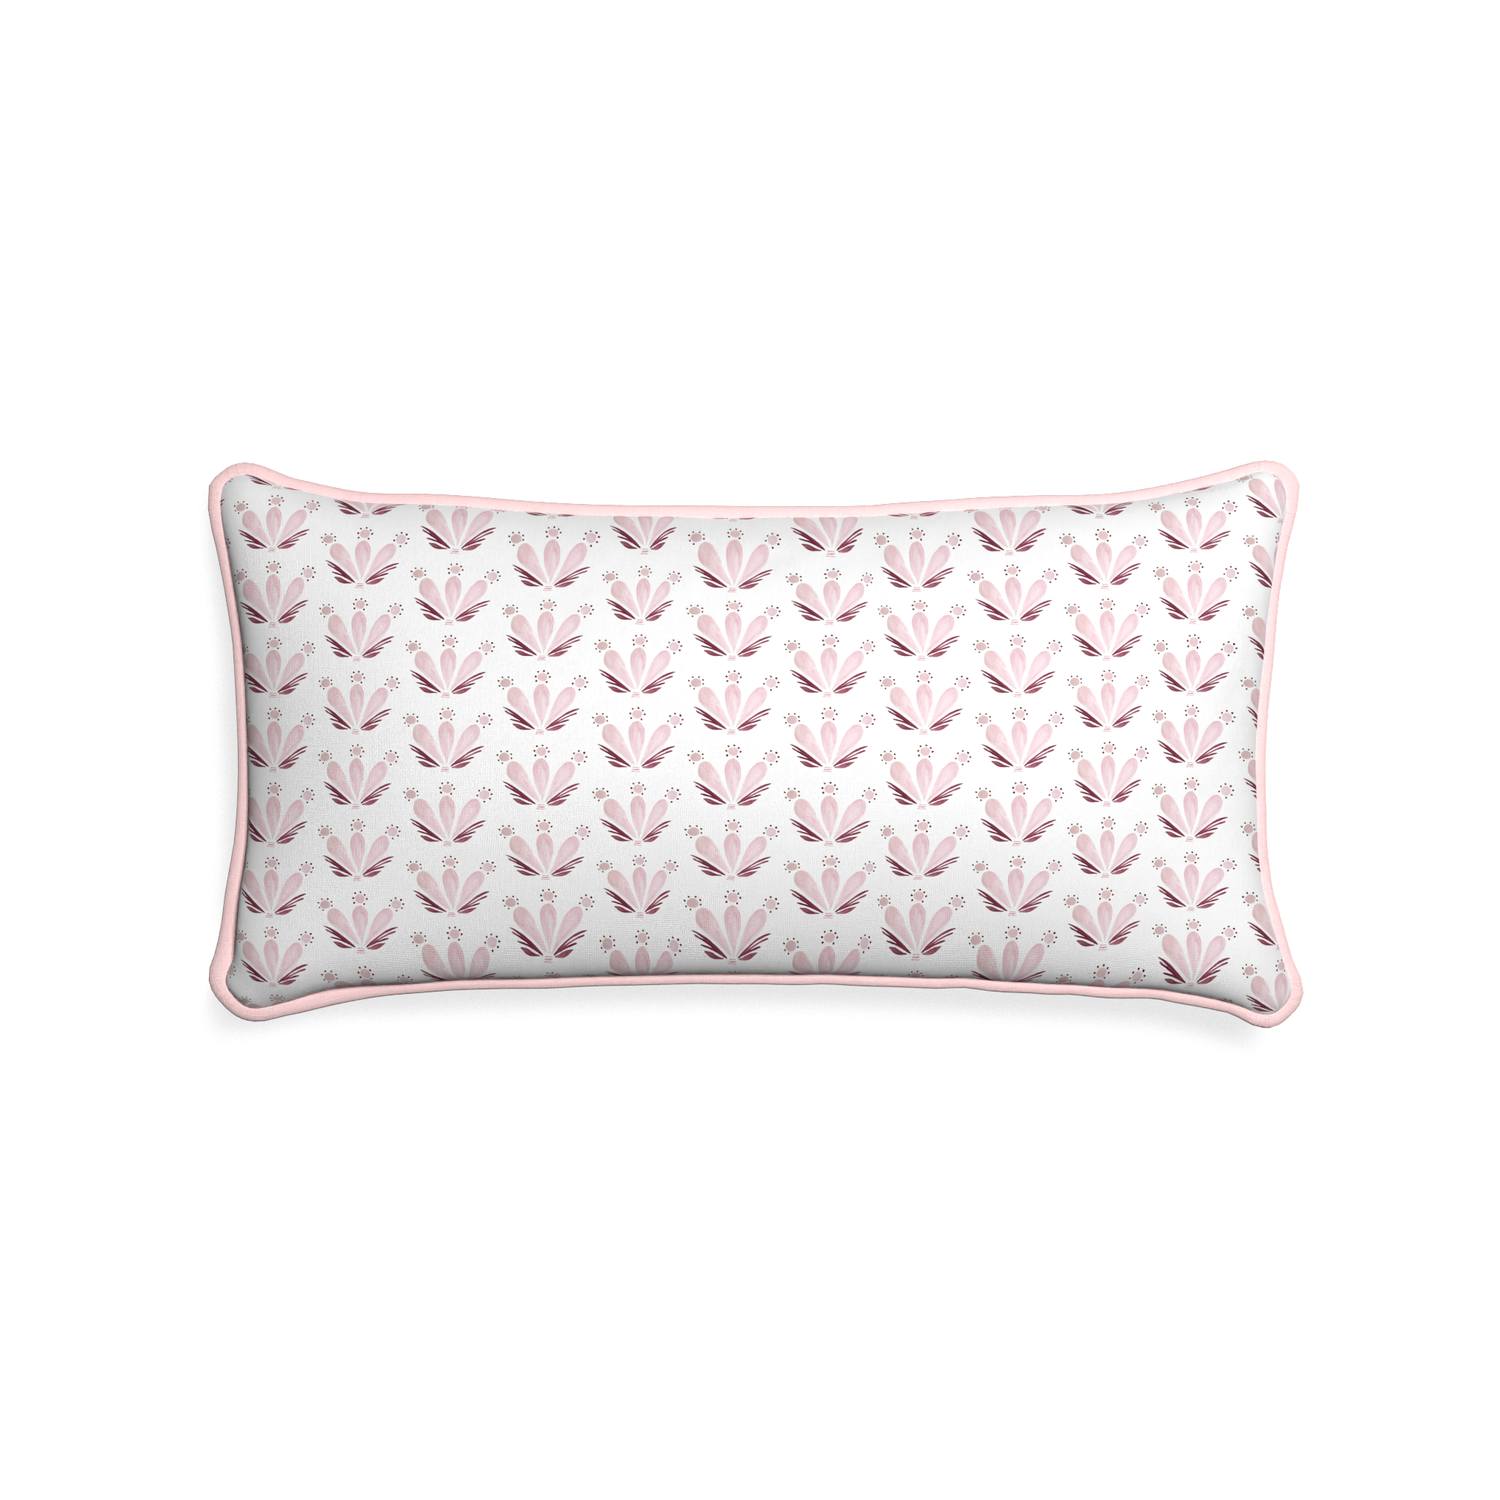 Midi-lumbar serena pink custom pink & burgundy drop repeat floralpillow with petal piping on white background